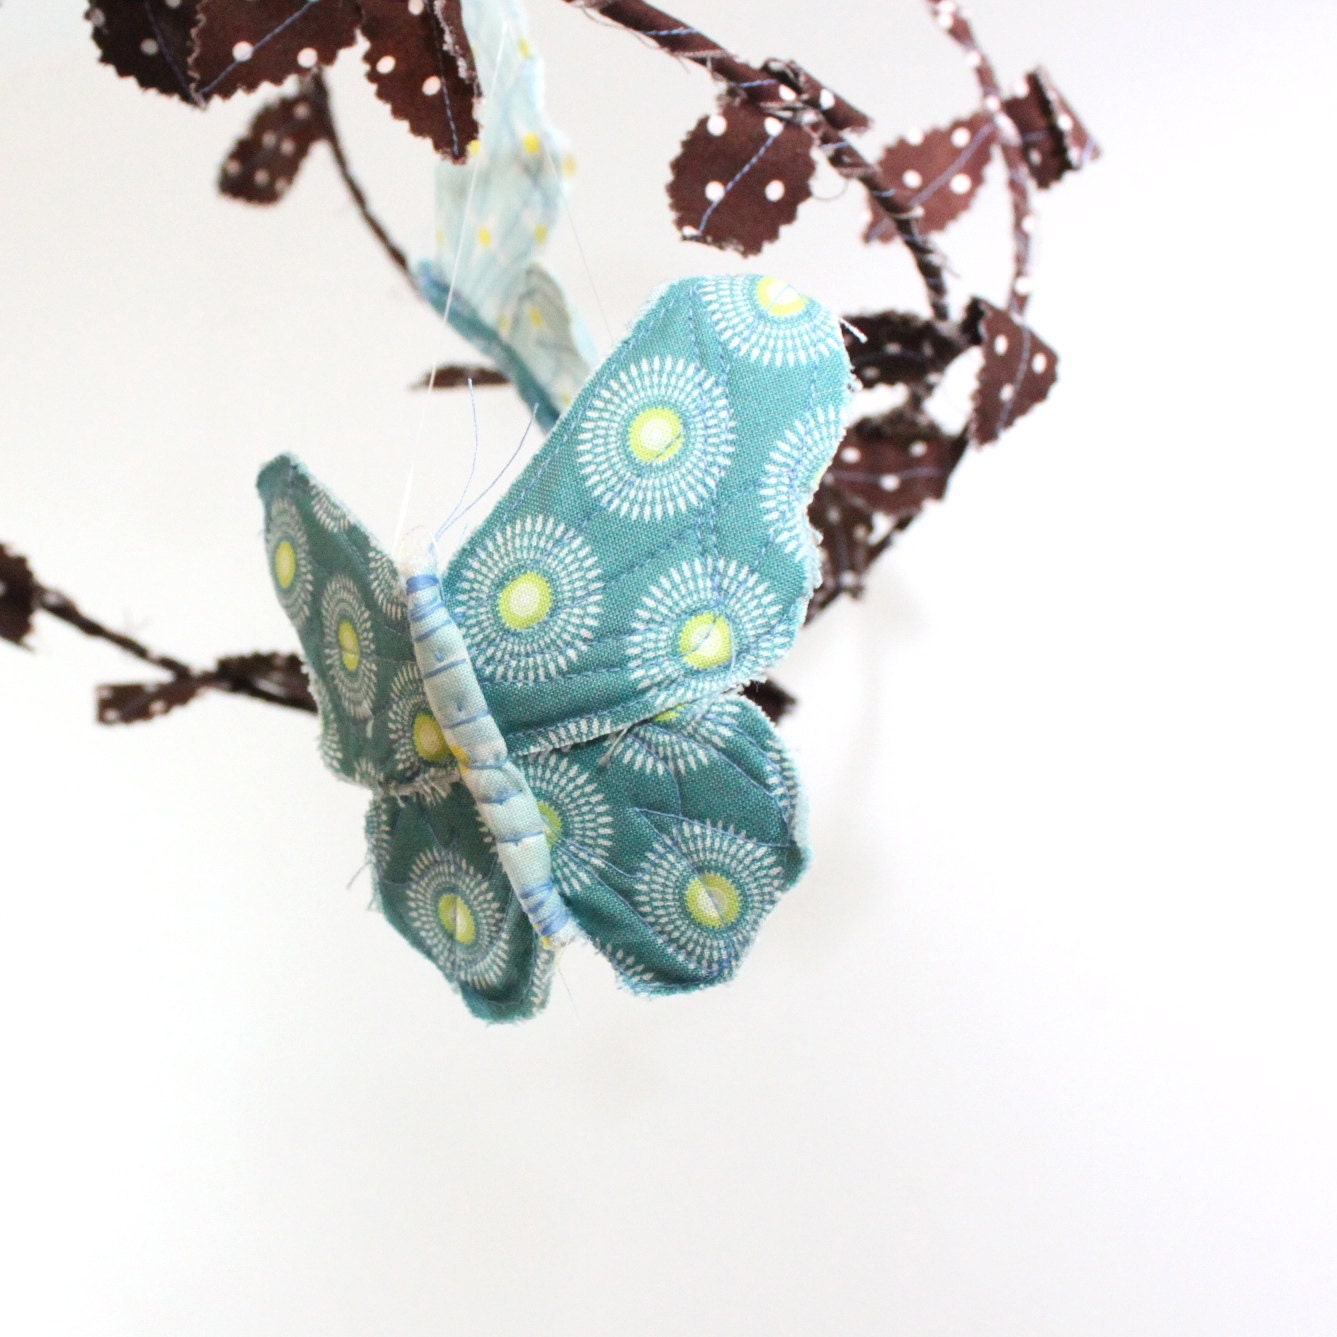 Butterfly Mobile - handmade fabric mobile in chocolate brown, sky blue, sunny yellow, teal, avocado, and gold